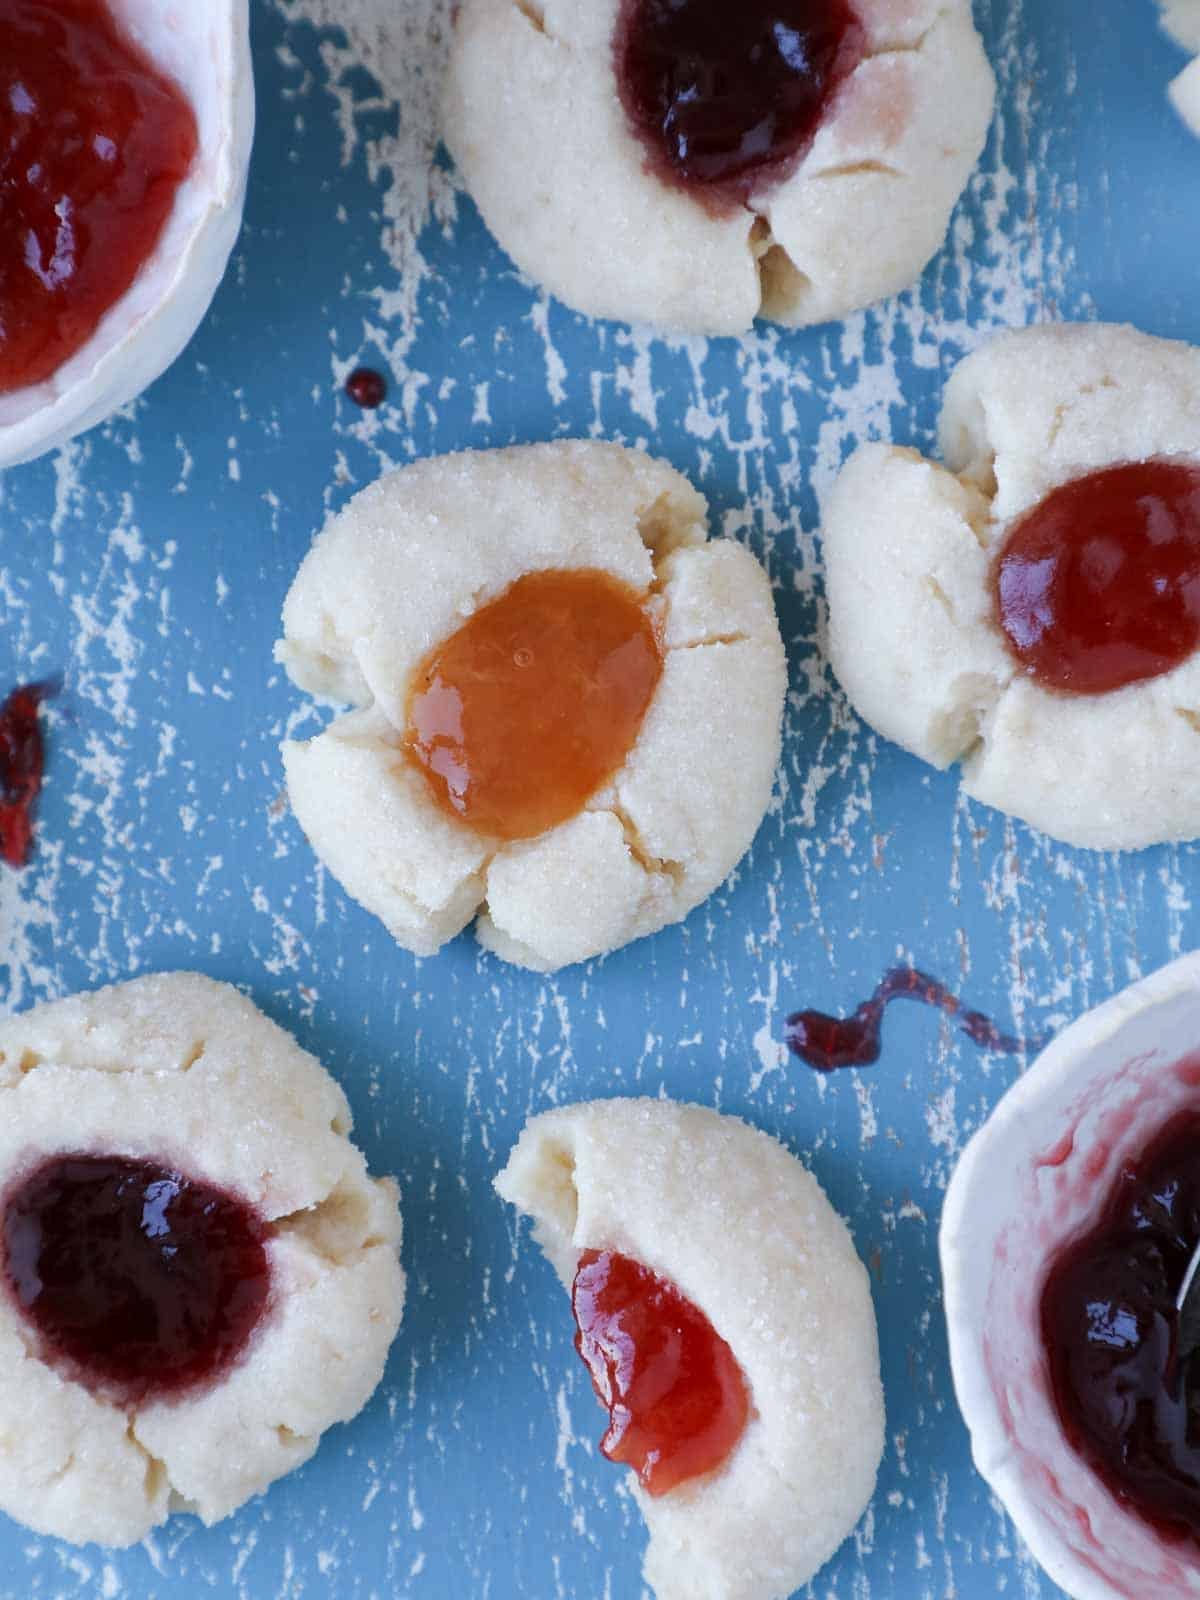 thumbprint cookies on blue board with jams. 